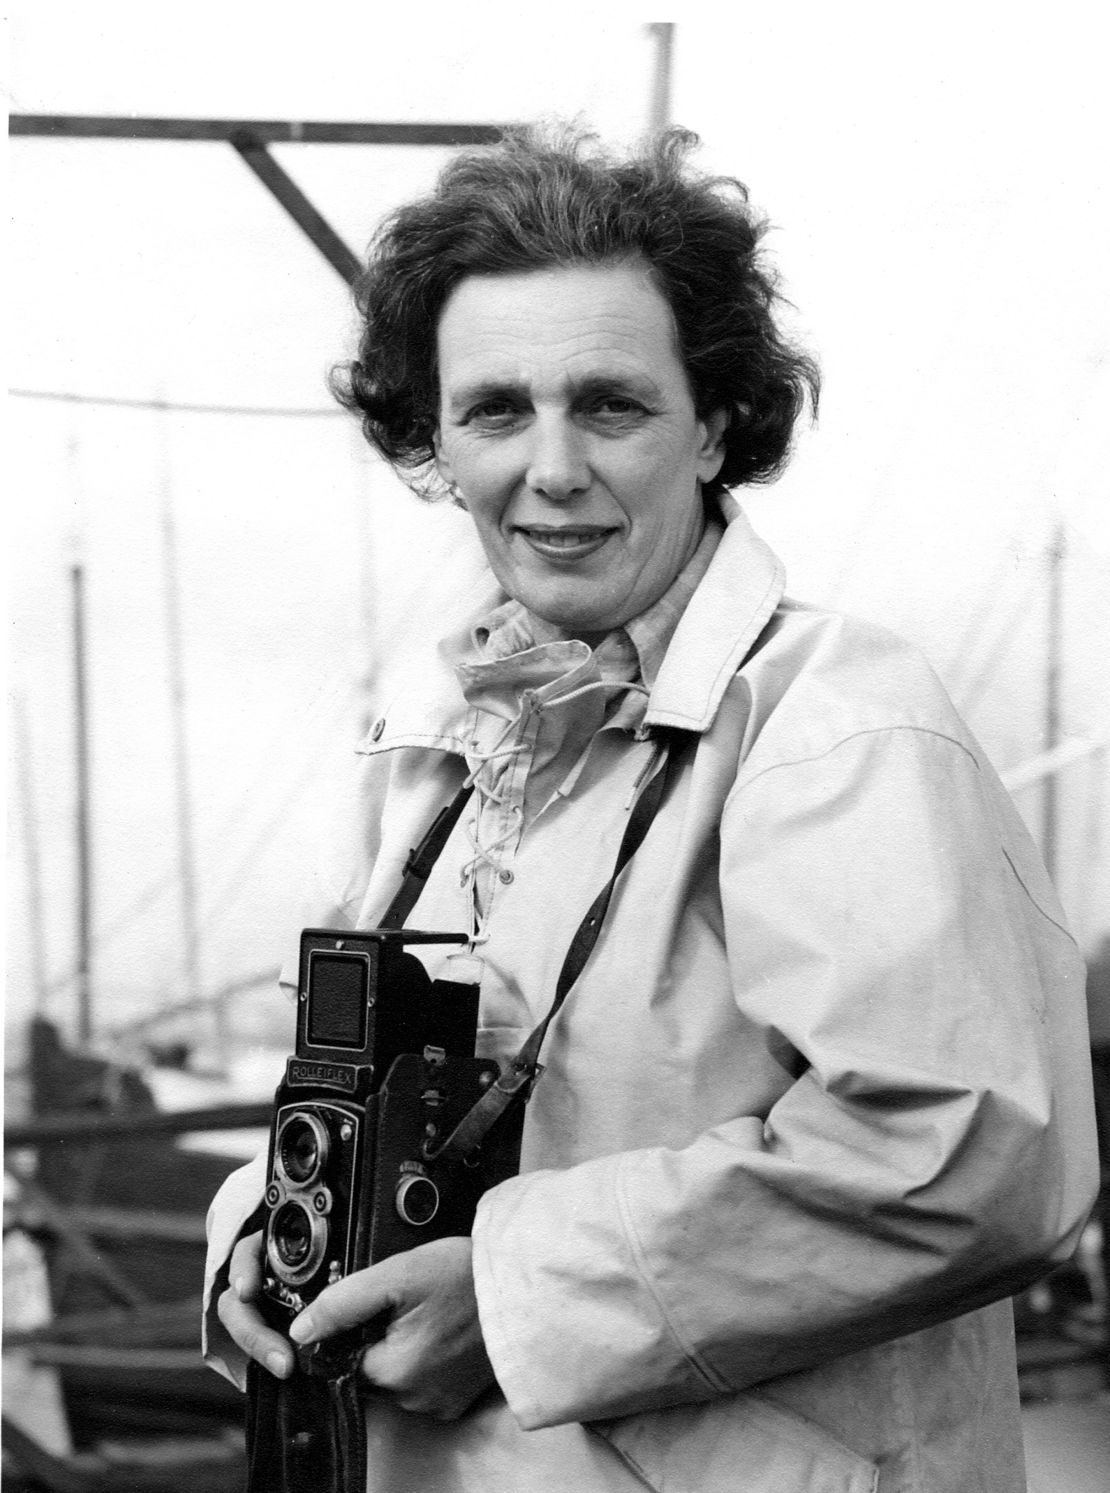 Photographer Eileen Ramsay pictured in 1963 